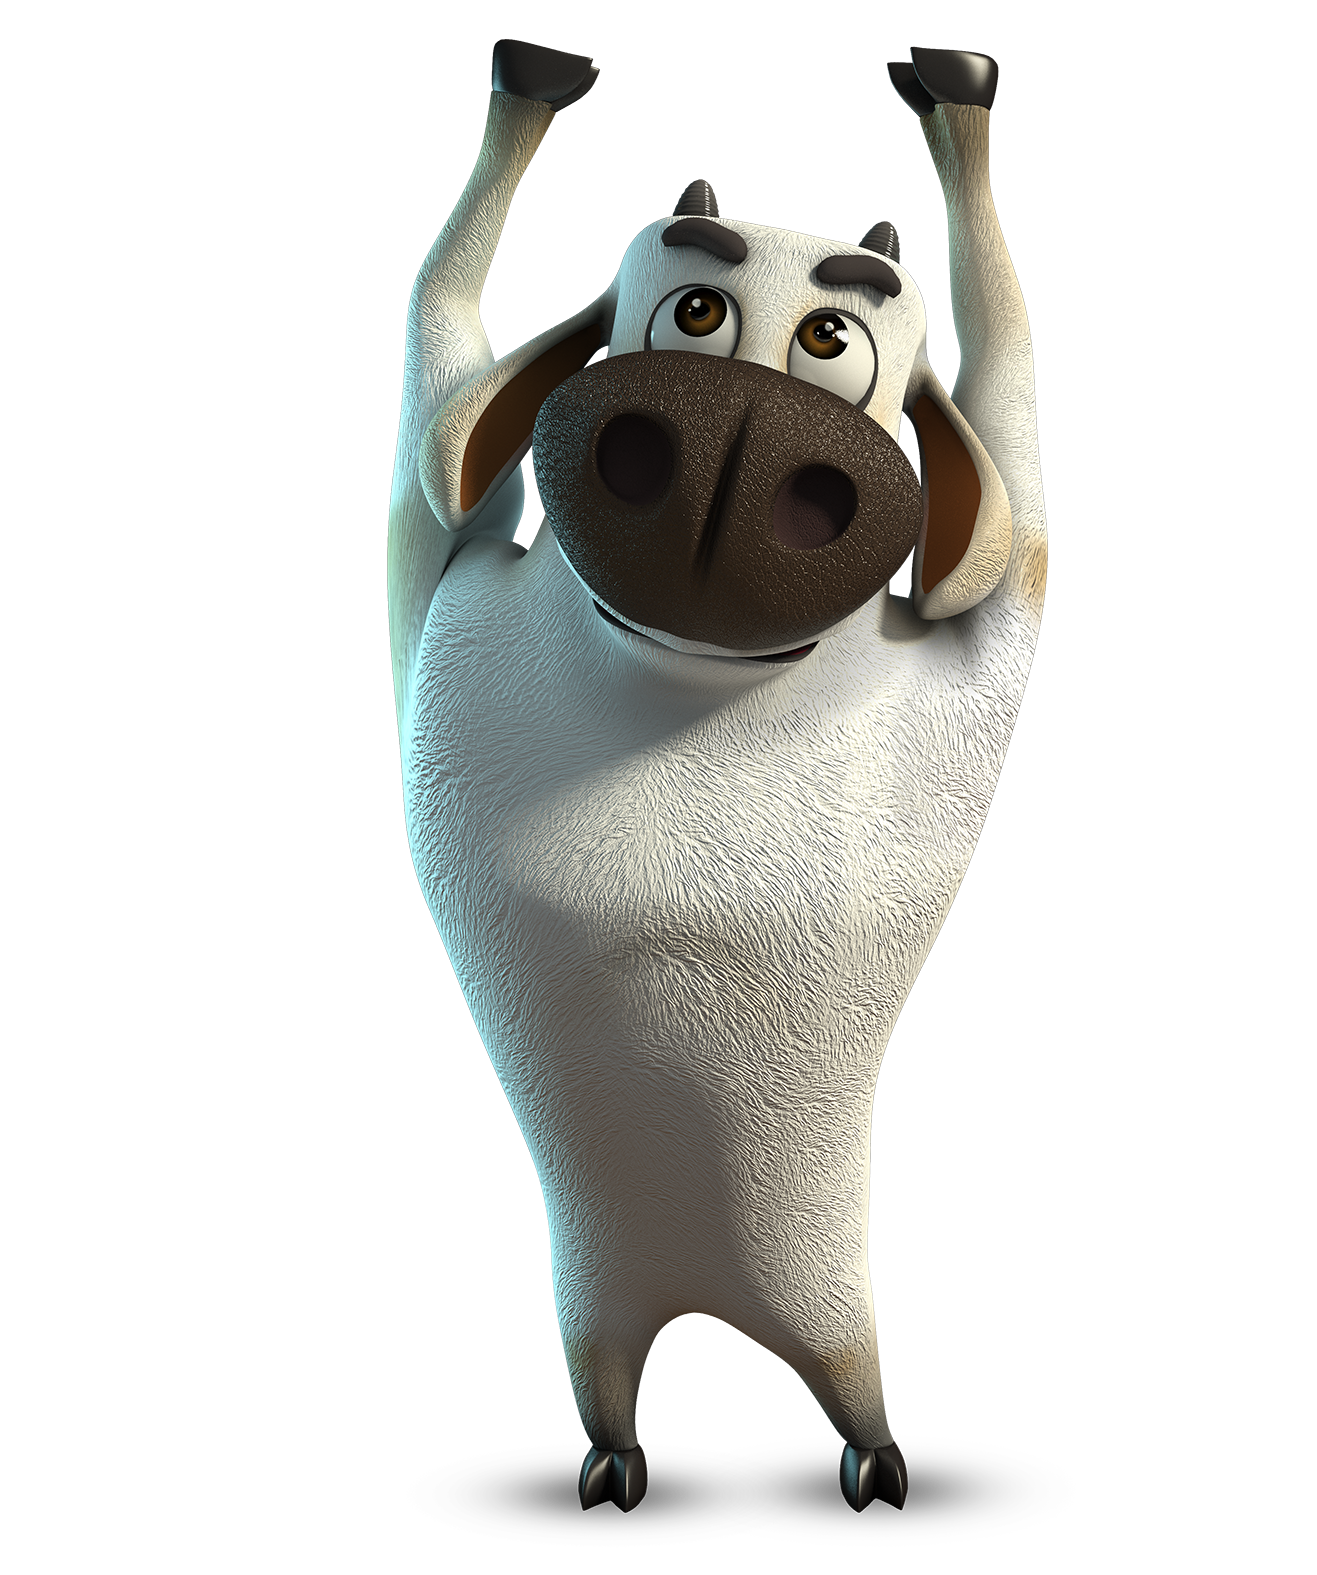 Cow Animated Image